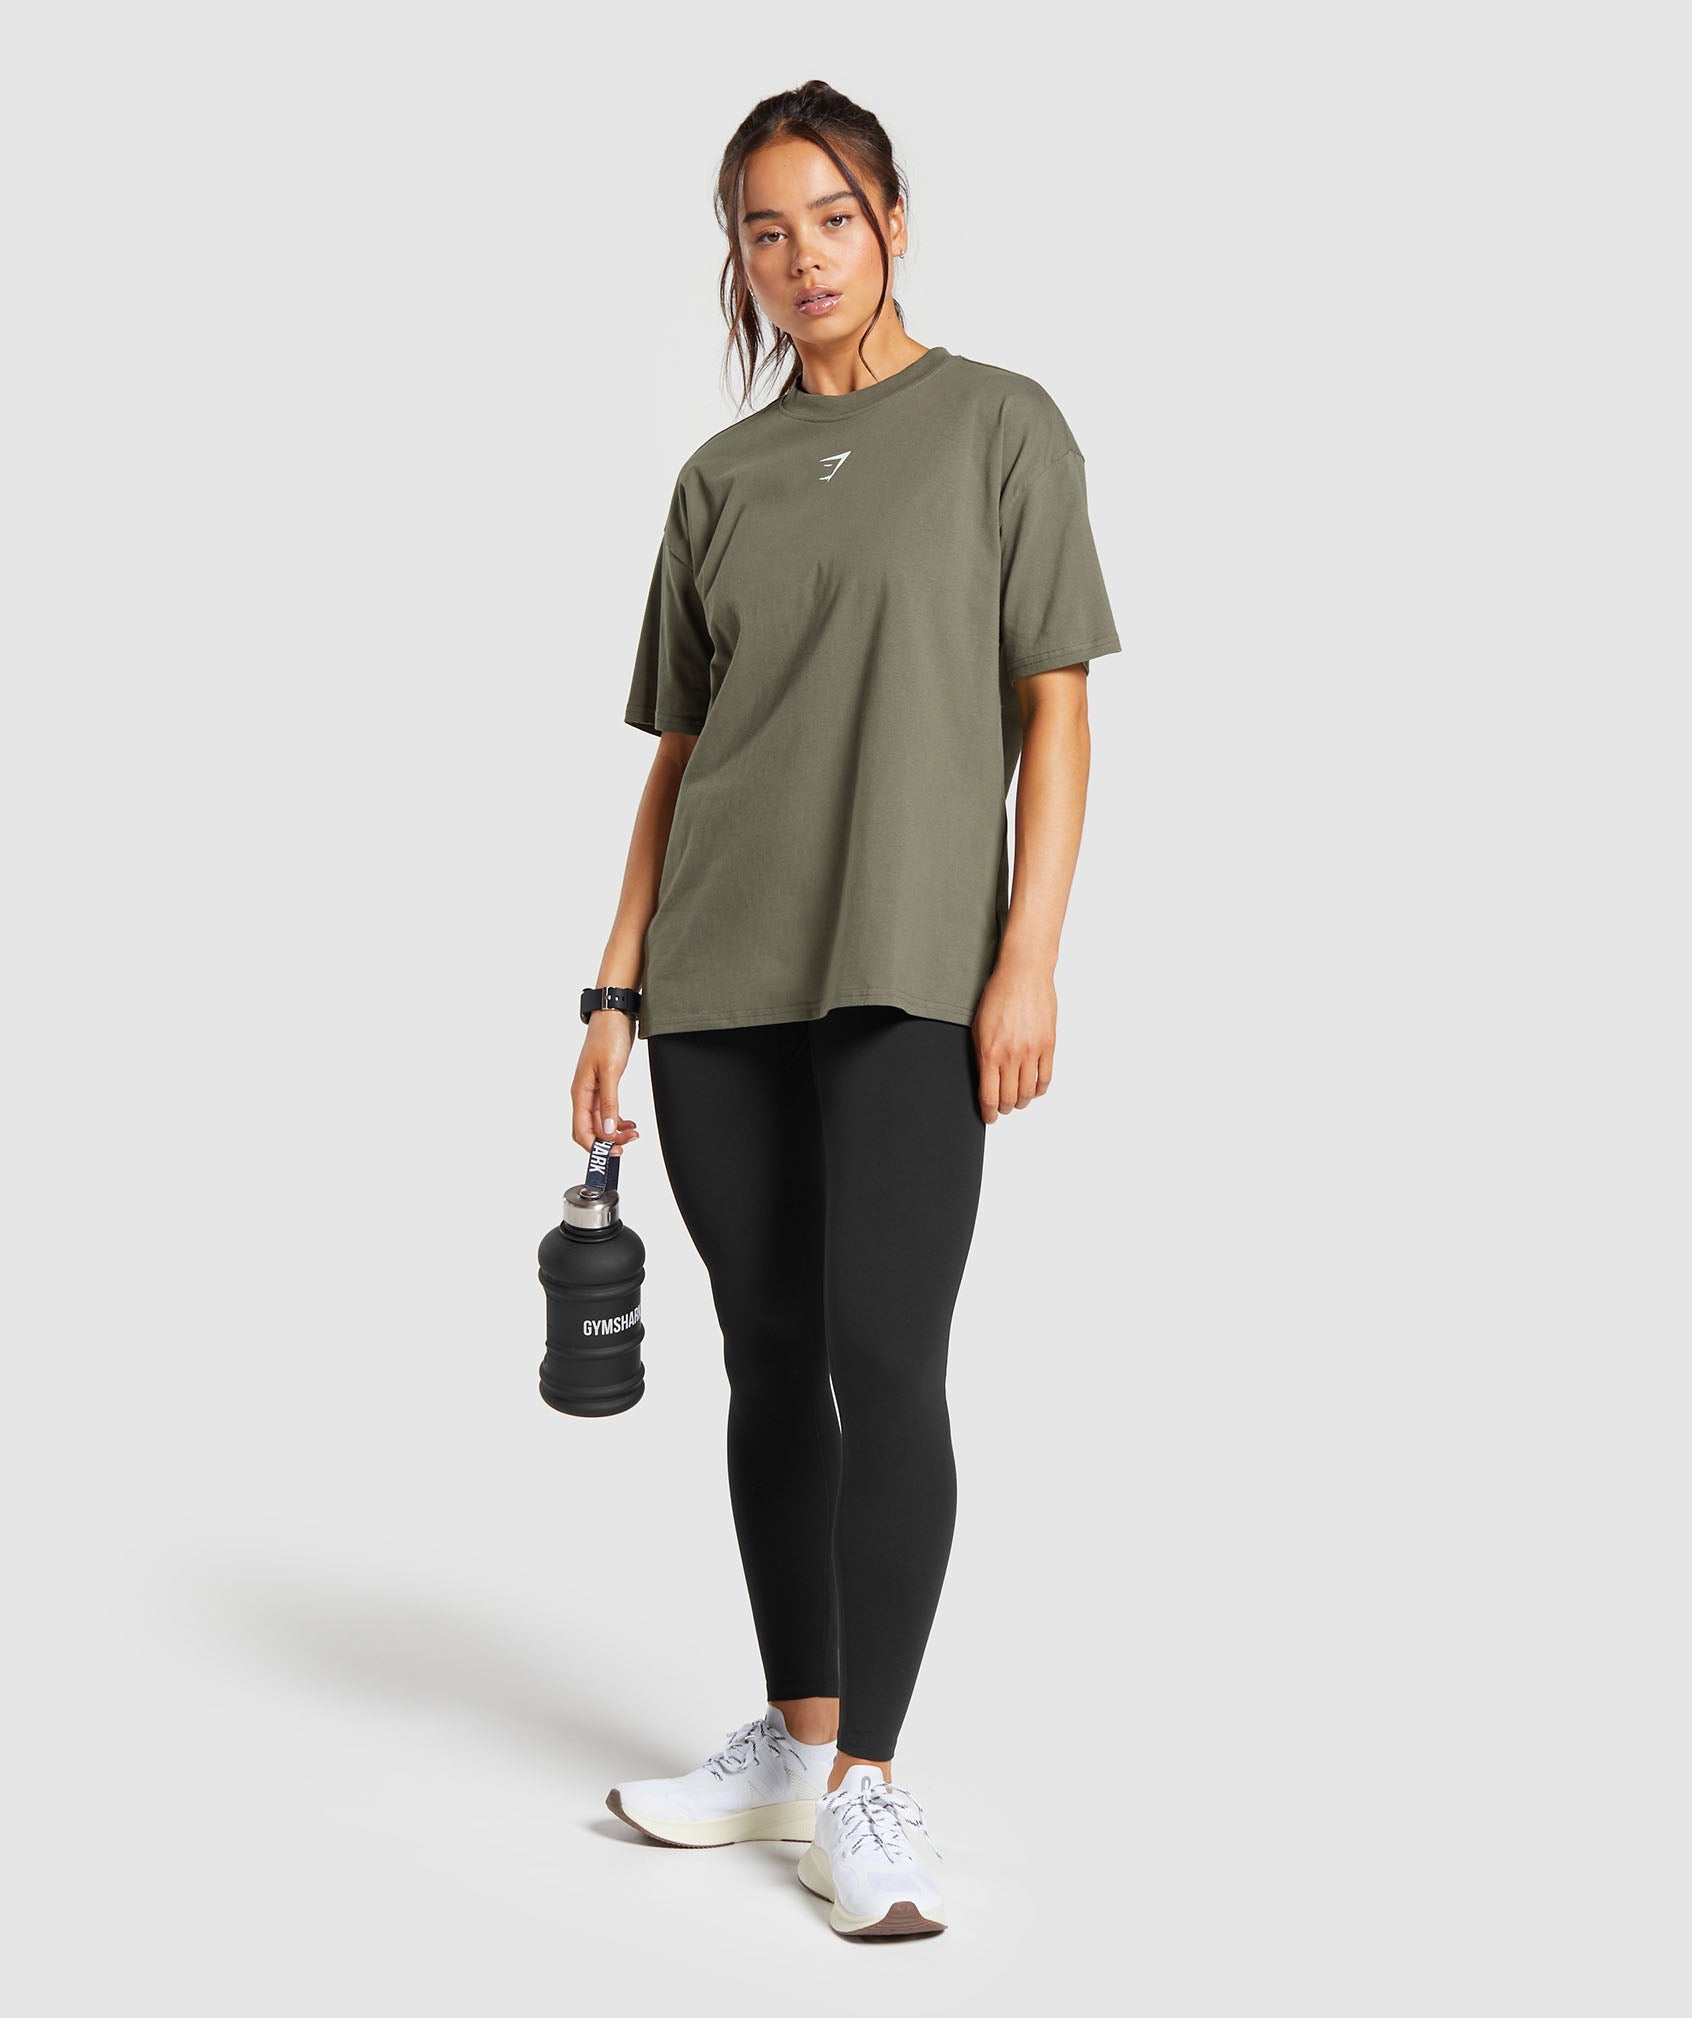 Fraction Oversized T-Shirt in Camo Brown - view 4